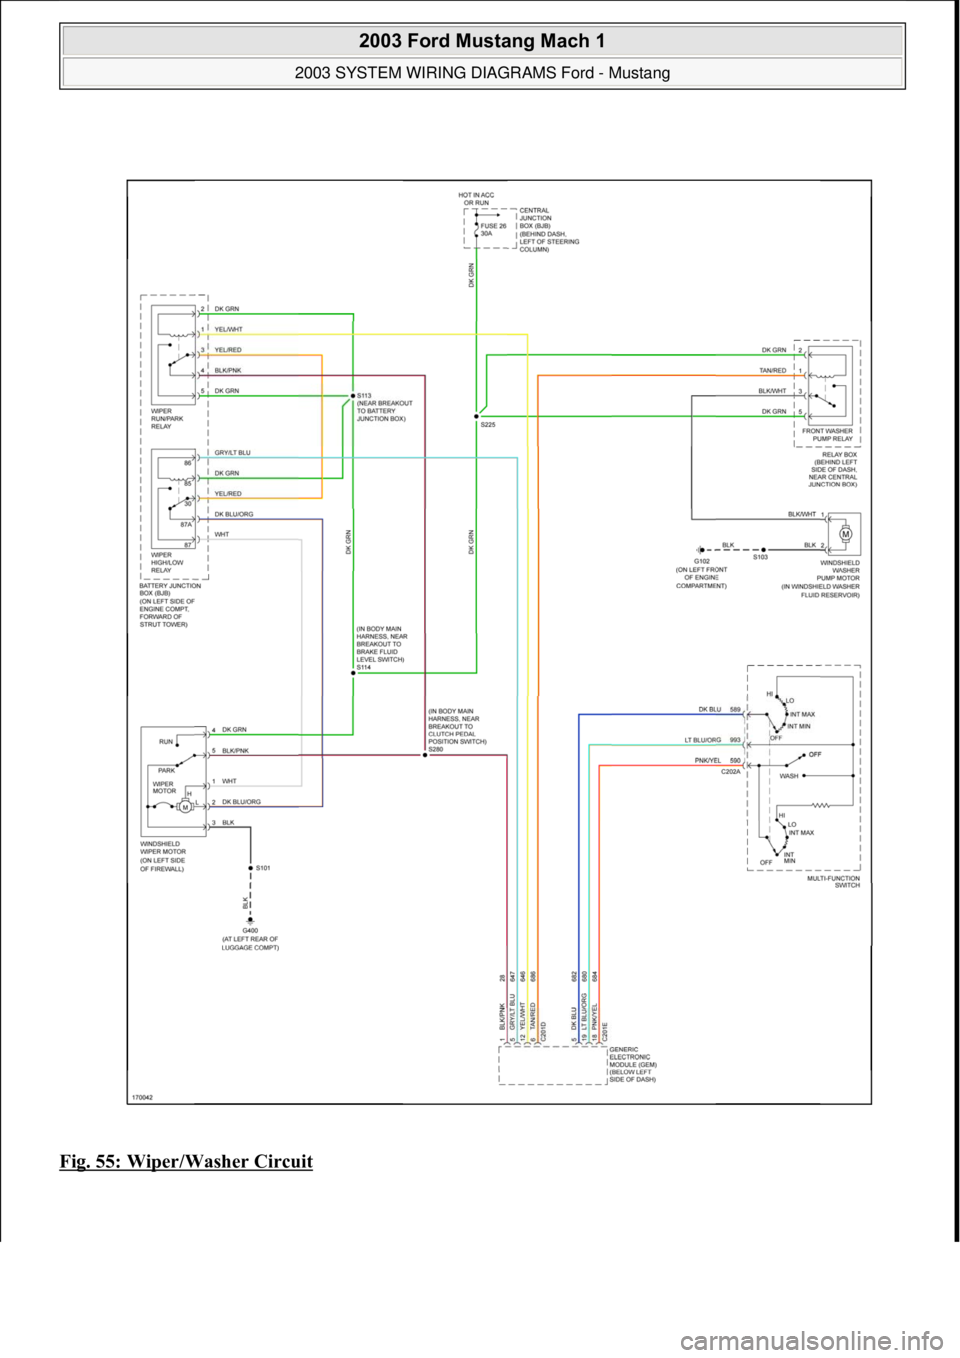 FORD MUSTANG 2003  Workshop Manual Fig. 55: Wiper/Washer Circuit 
 
2003 Ford Mustang Mach 1 
2003 SYSTEM WIRING DIAGRAMS Ford - Mustang  
111  
18 ноября  2011 г. 12:54:33Page 56 © 2006 Mitchell Repair Information Company, LLC